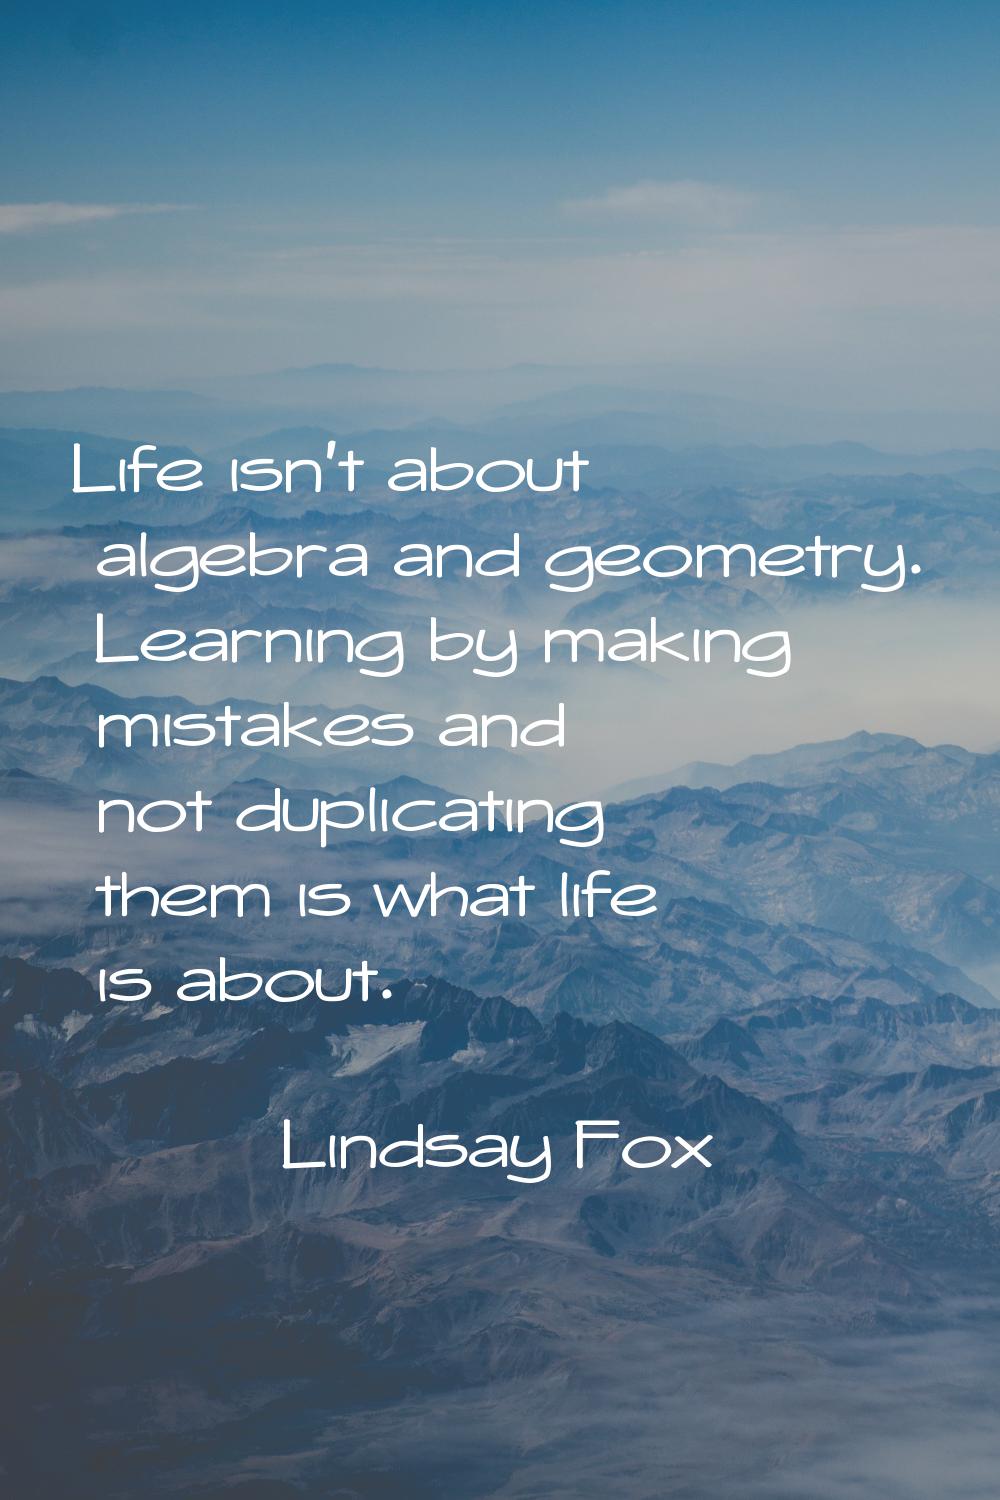 Life isn't about algebra and geometry. Learning by making mistakes and not duplicating them is what